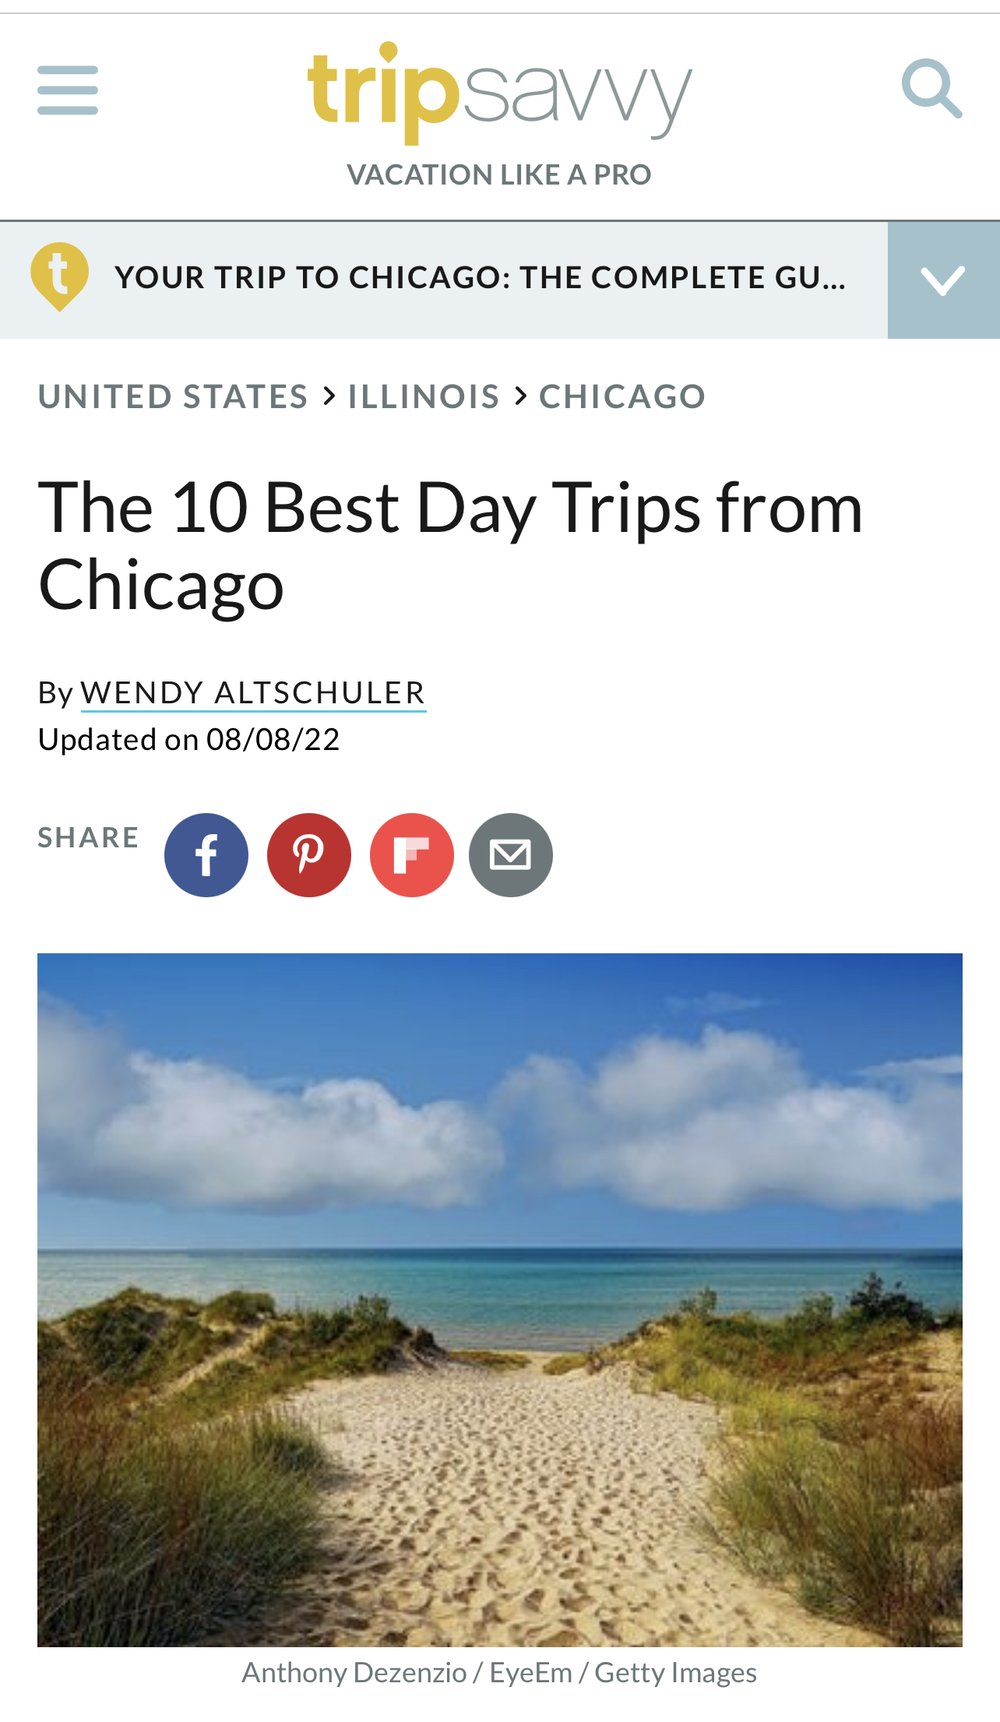 The 10 Best Day Trips from Chicago